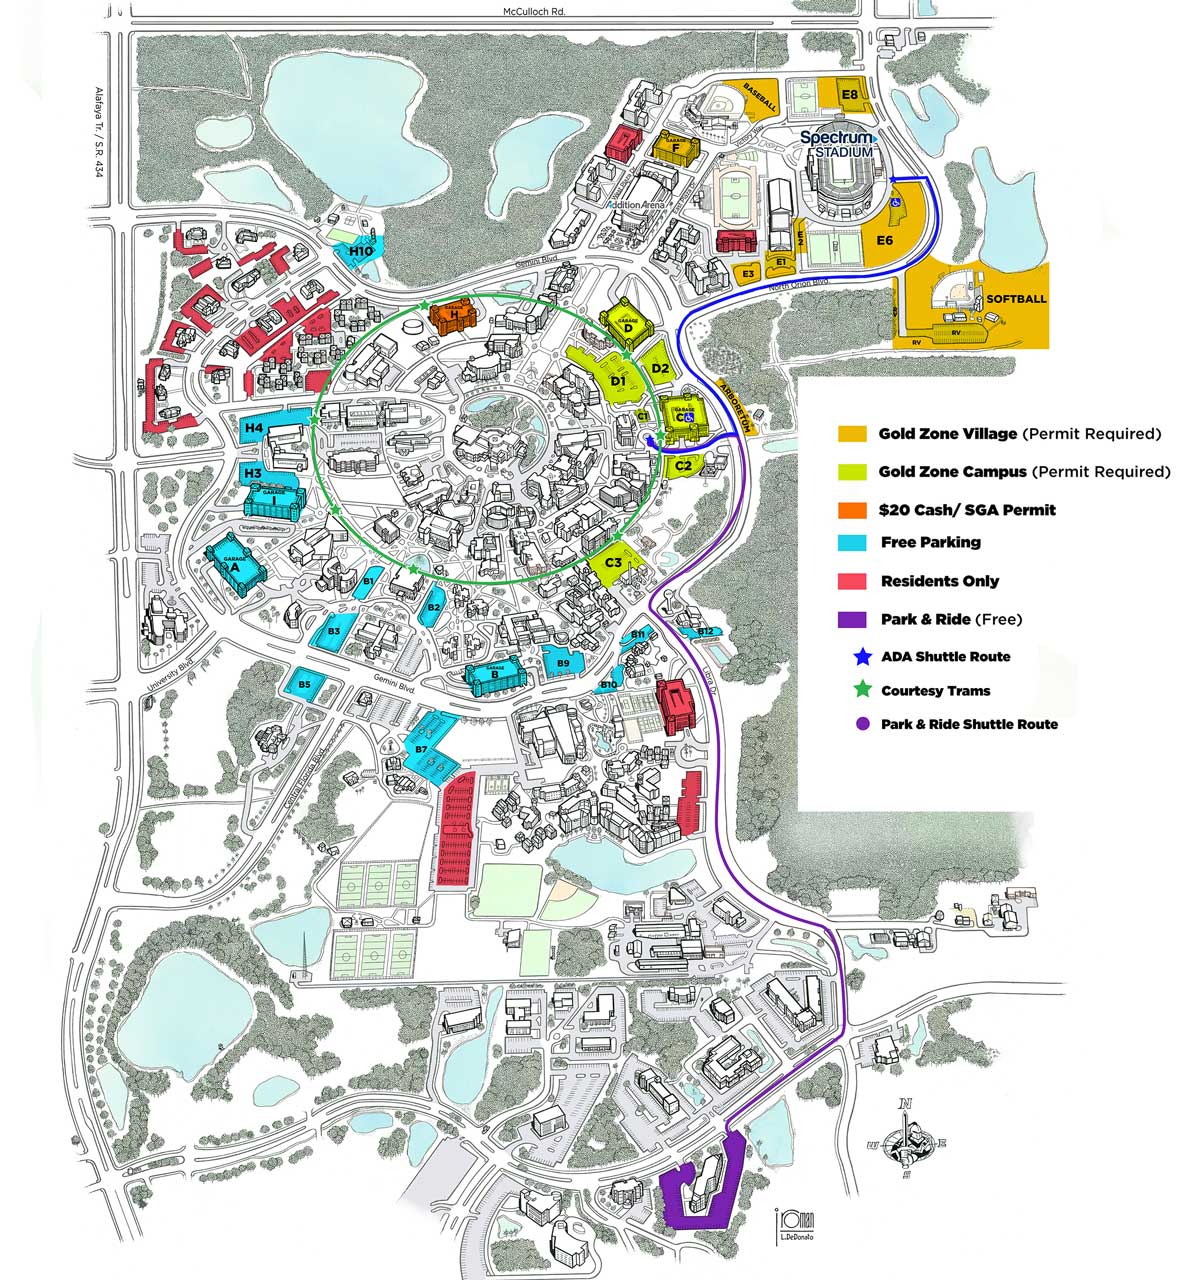 map of UCF campus that shows parking lots and shuttle routes